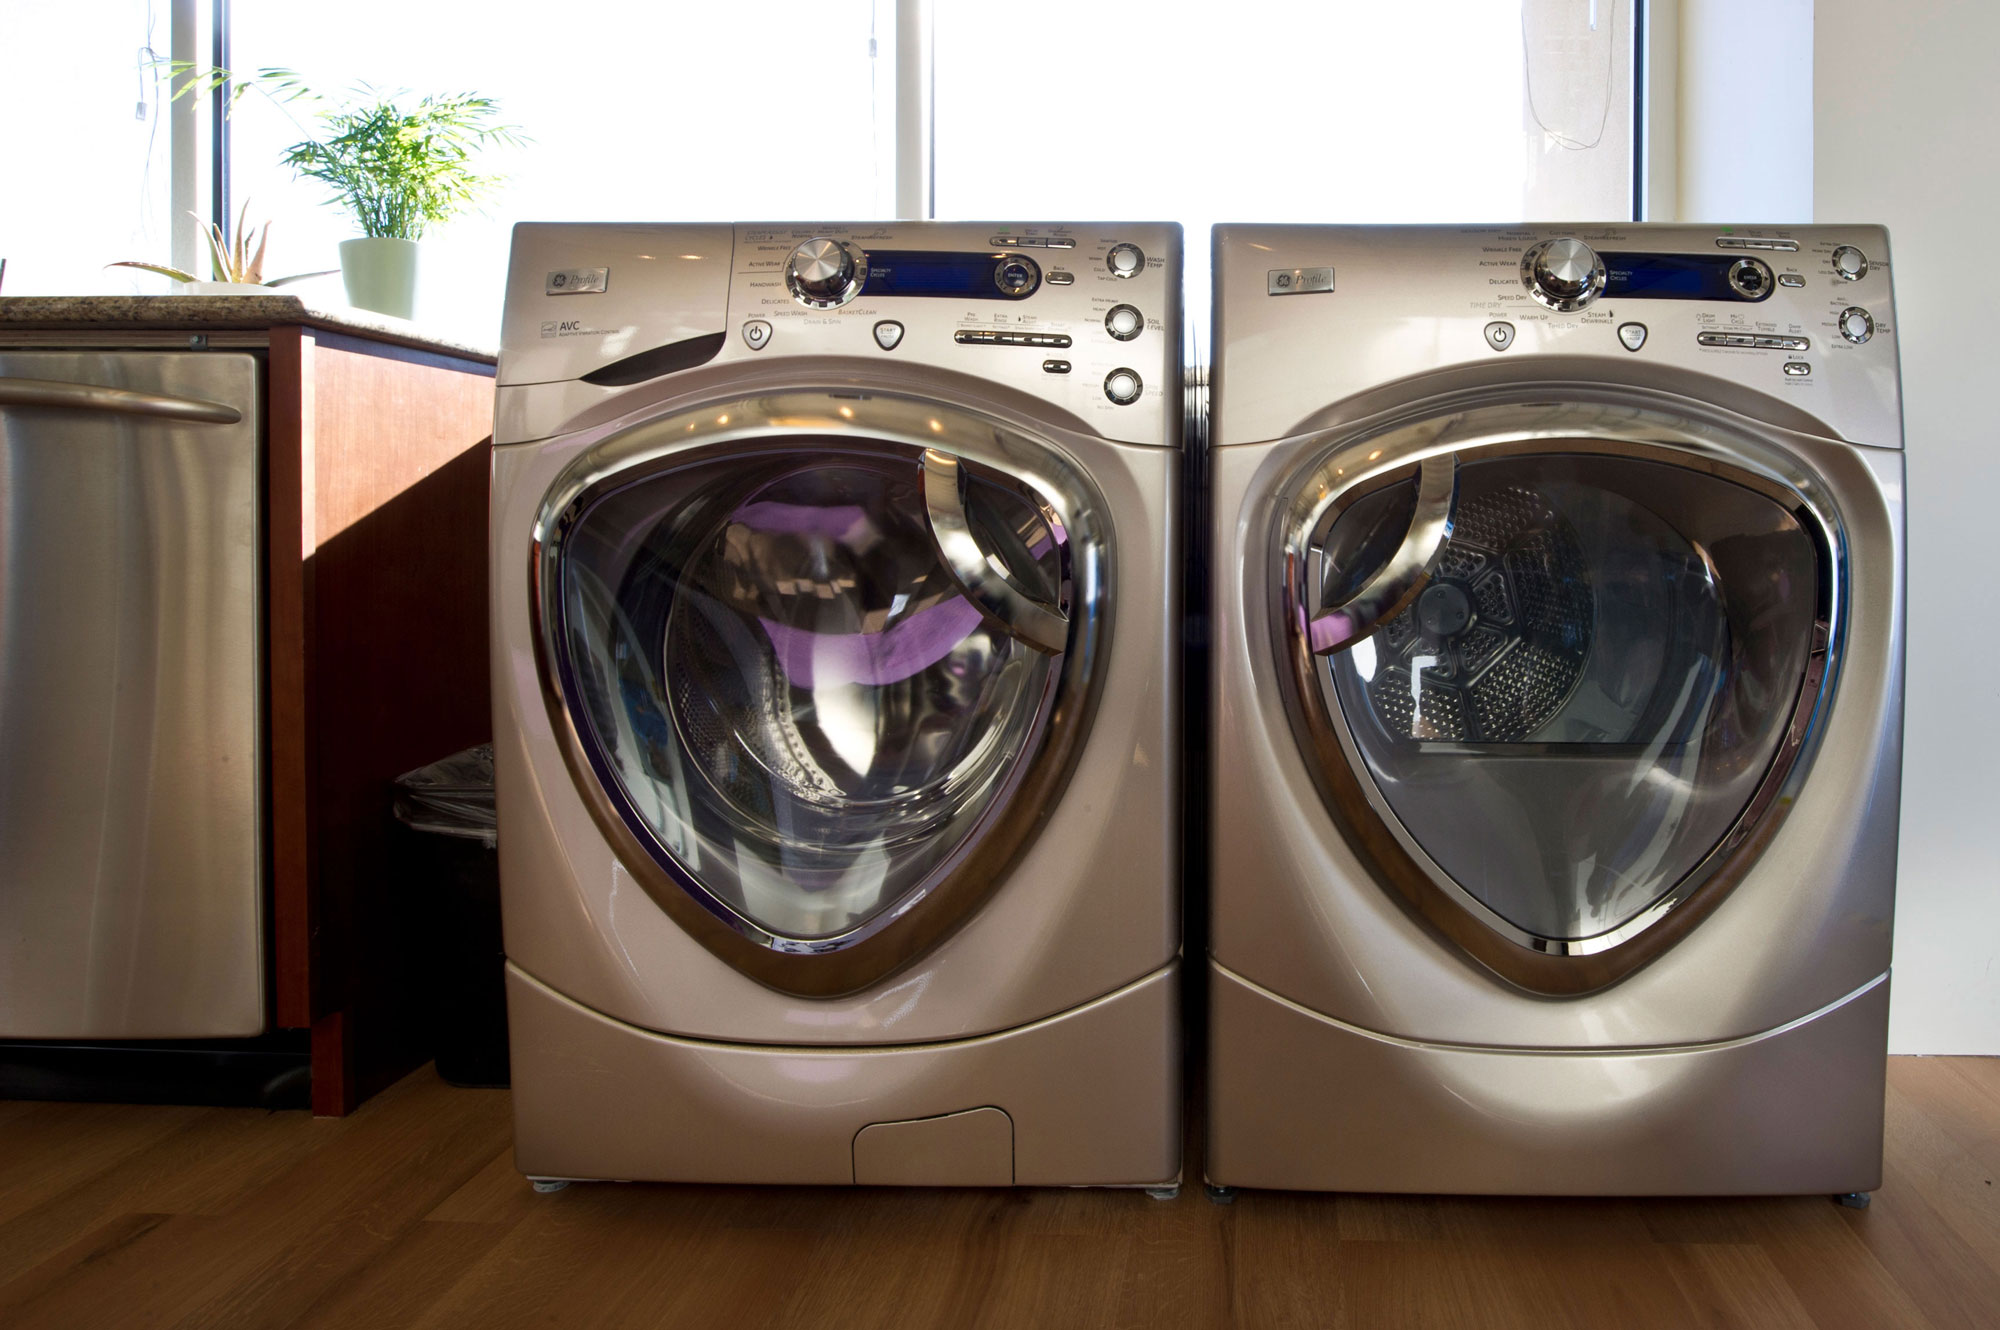 Picture of a Washing Machine and Dryer